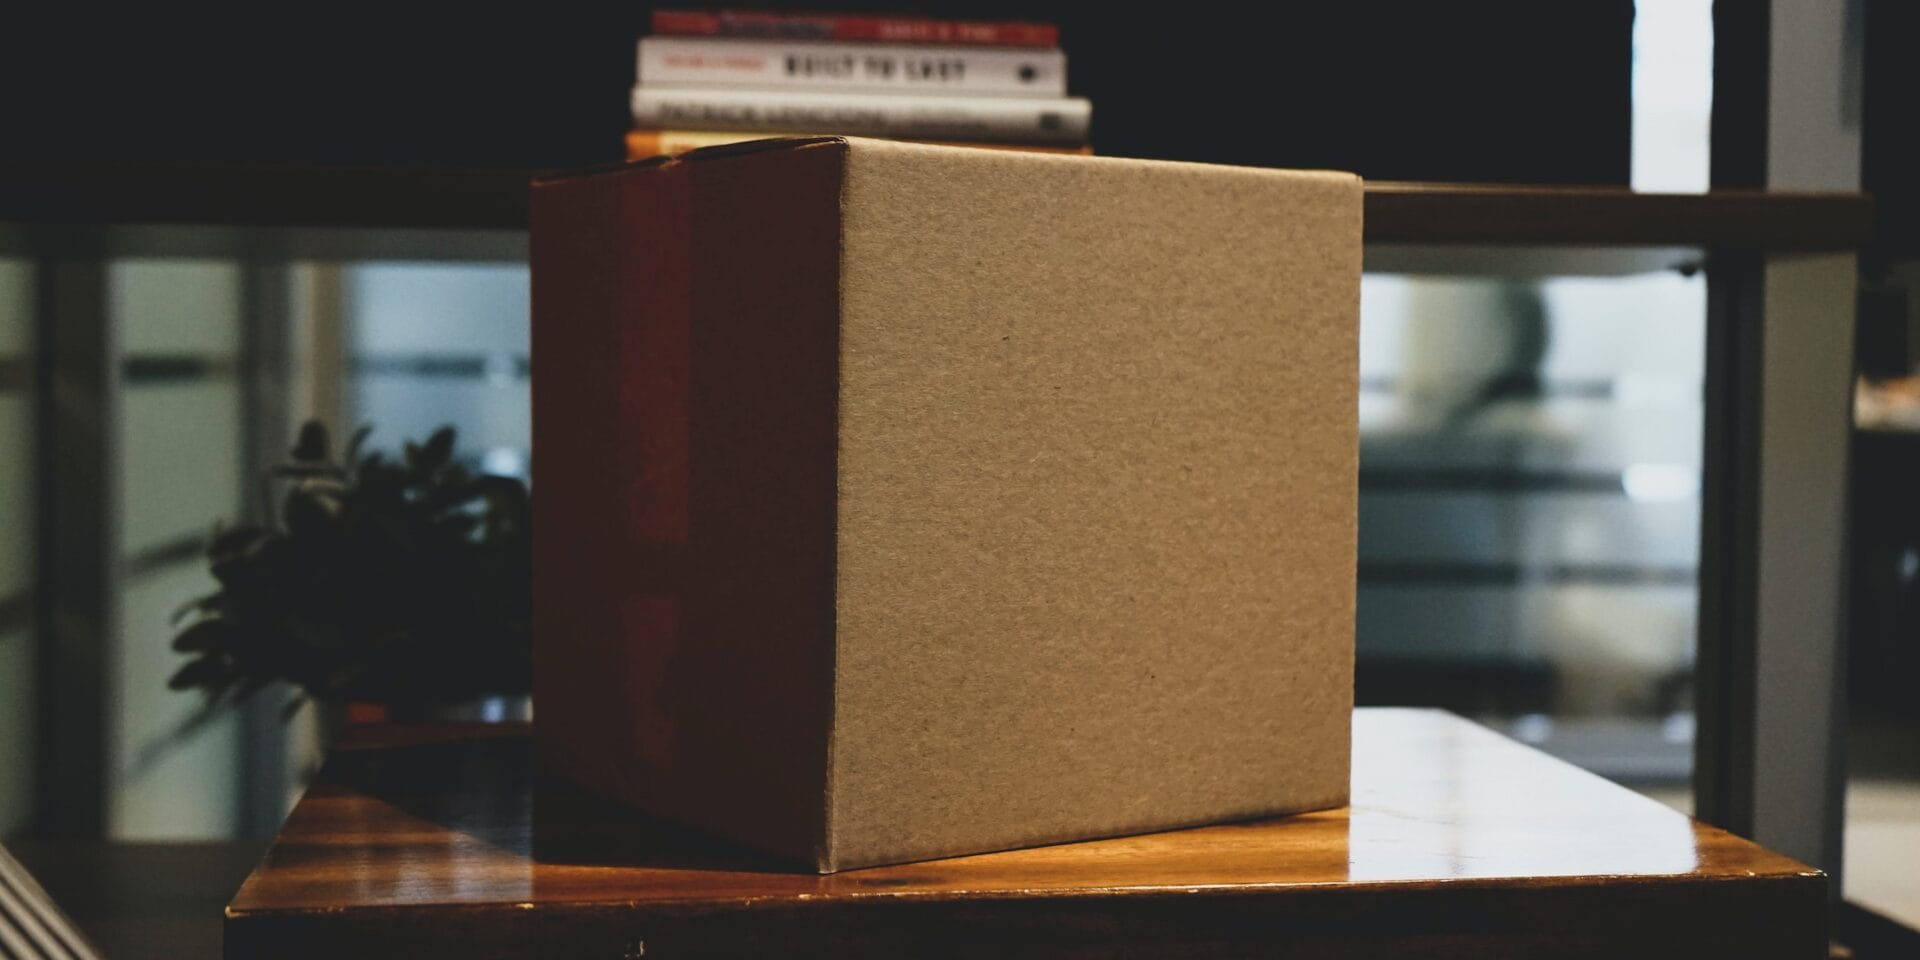 A corrugated box is taped closed and sits atop a desk in a darkened room.